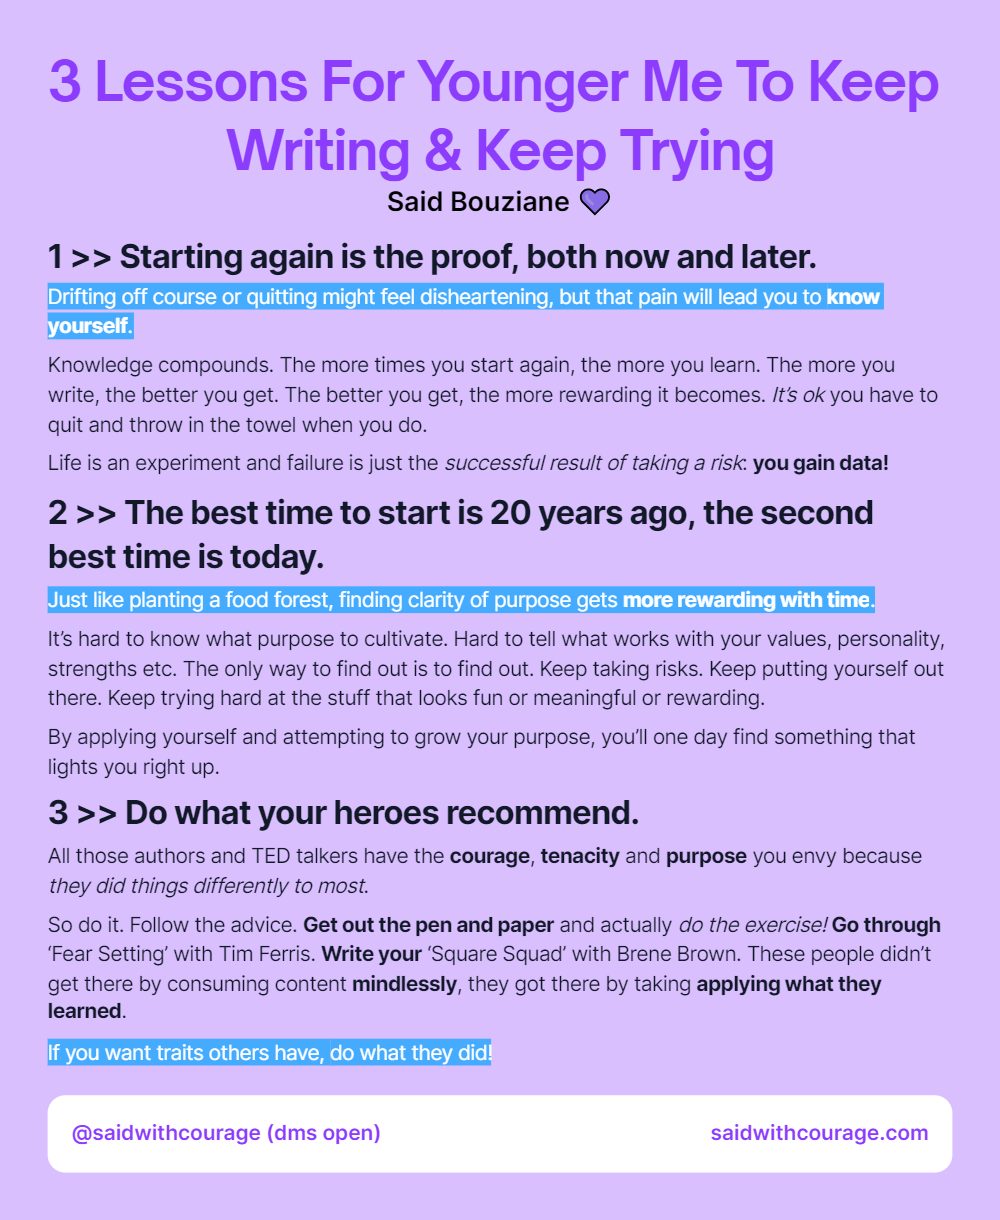 3 Lessons For Younger Me To Keep Writing & Keep Trying